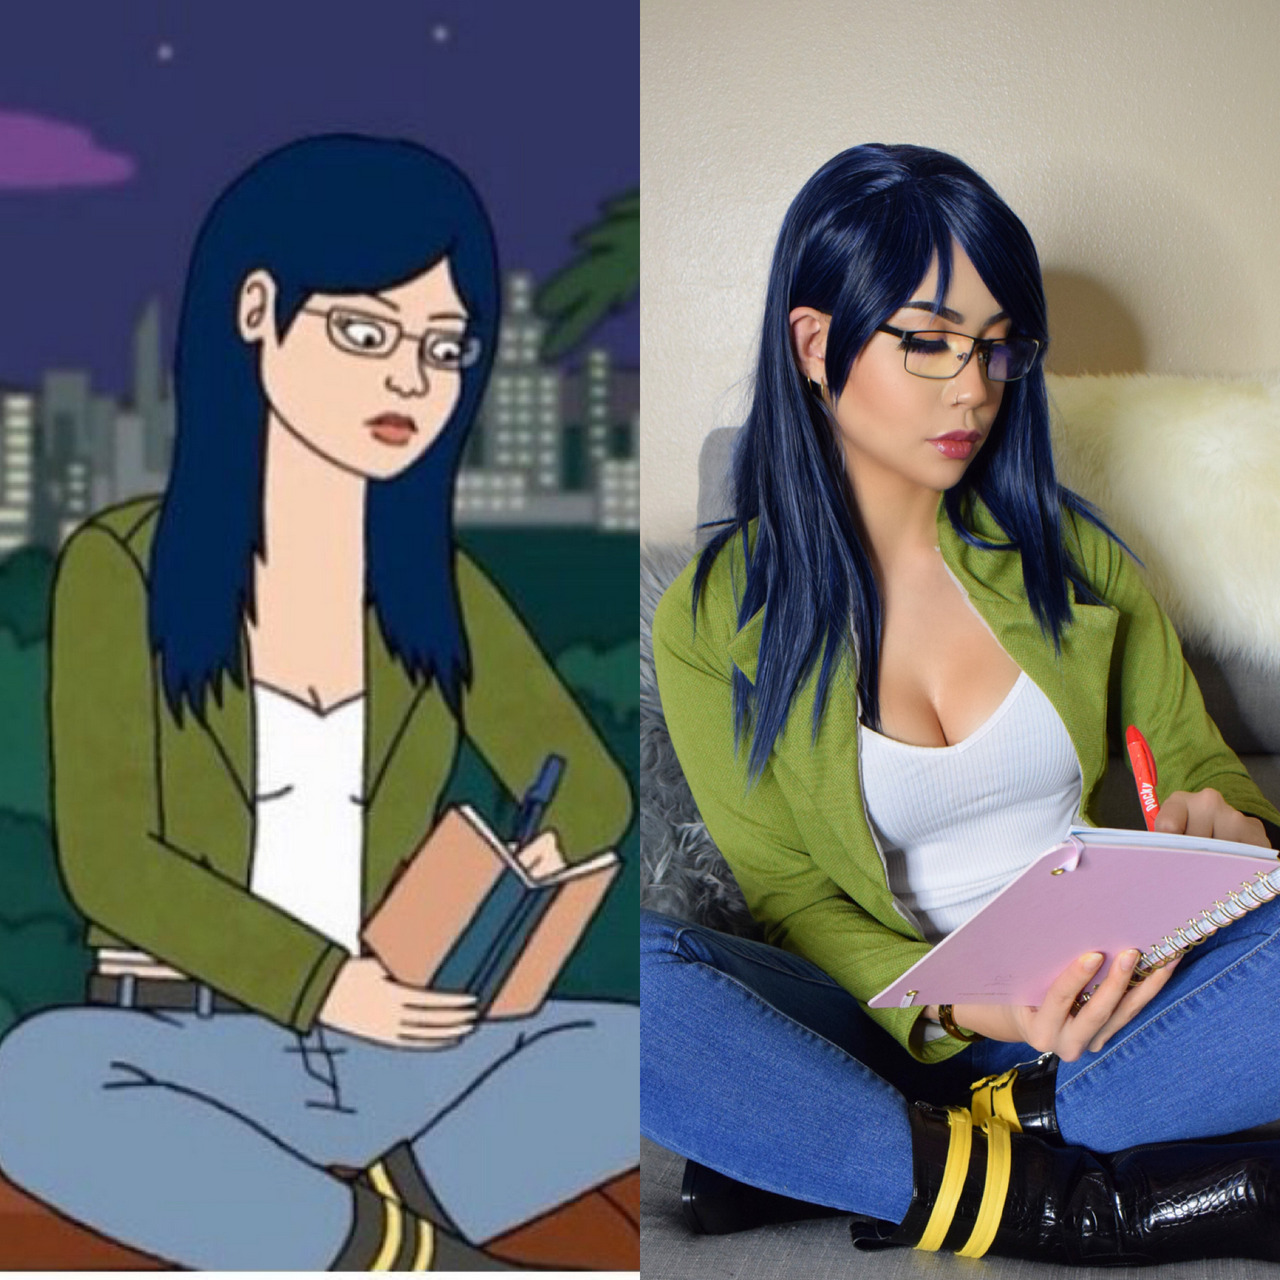 Diane Nguyen From Bojack Horseman Side By Side Cosplay By Felicia Vo